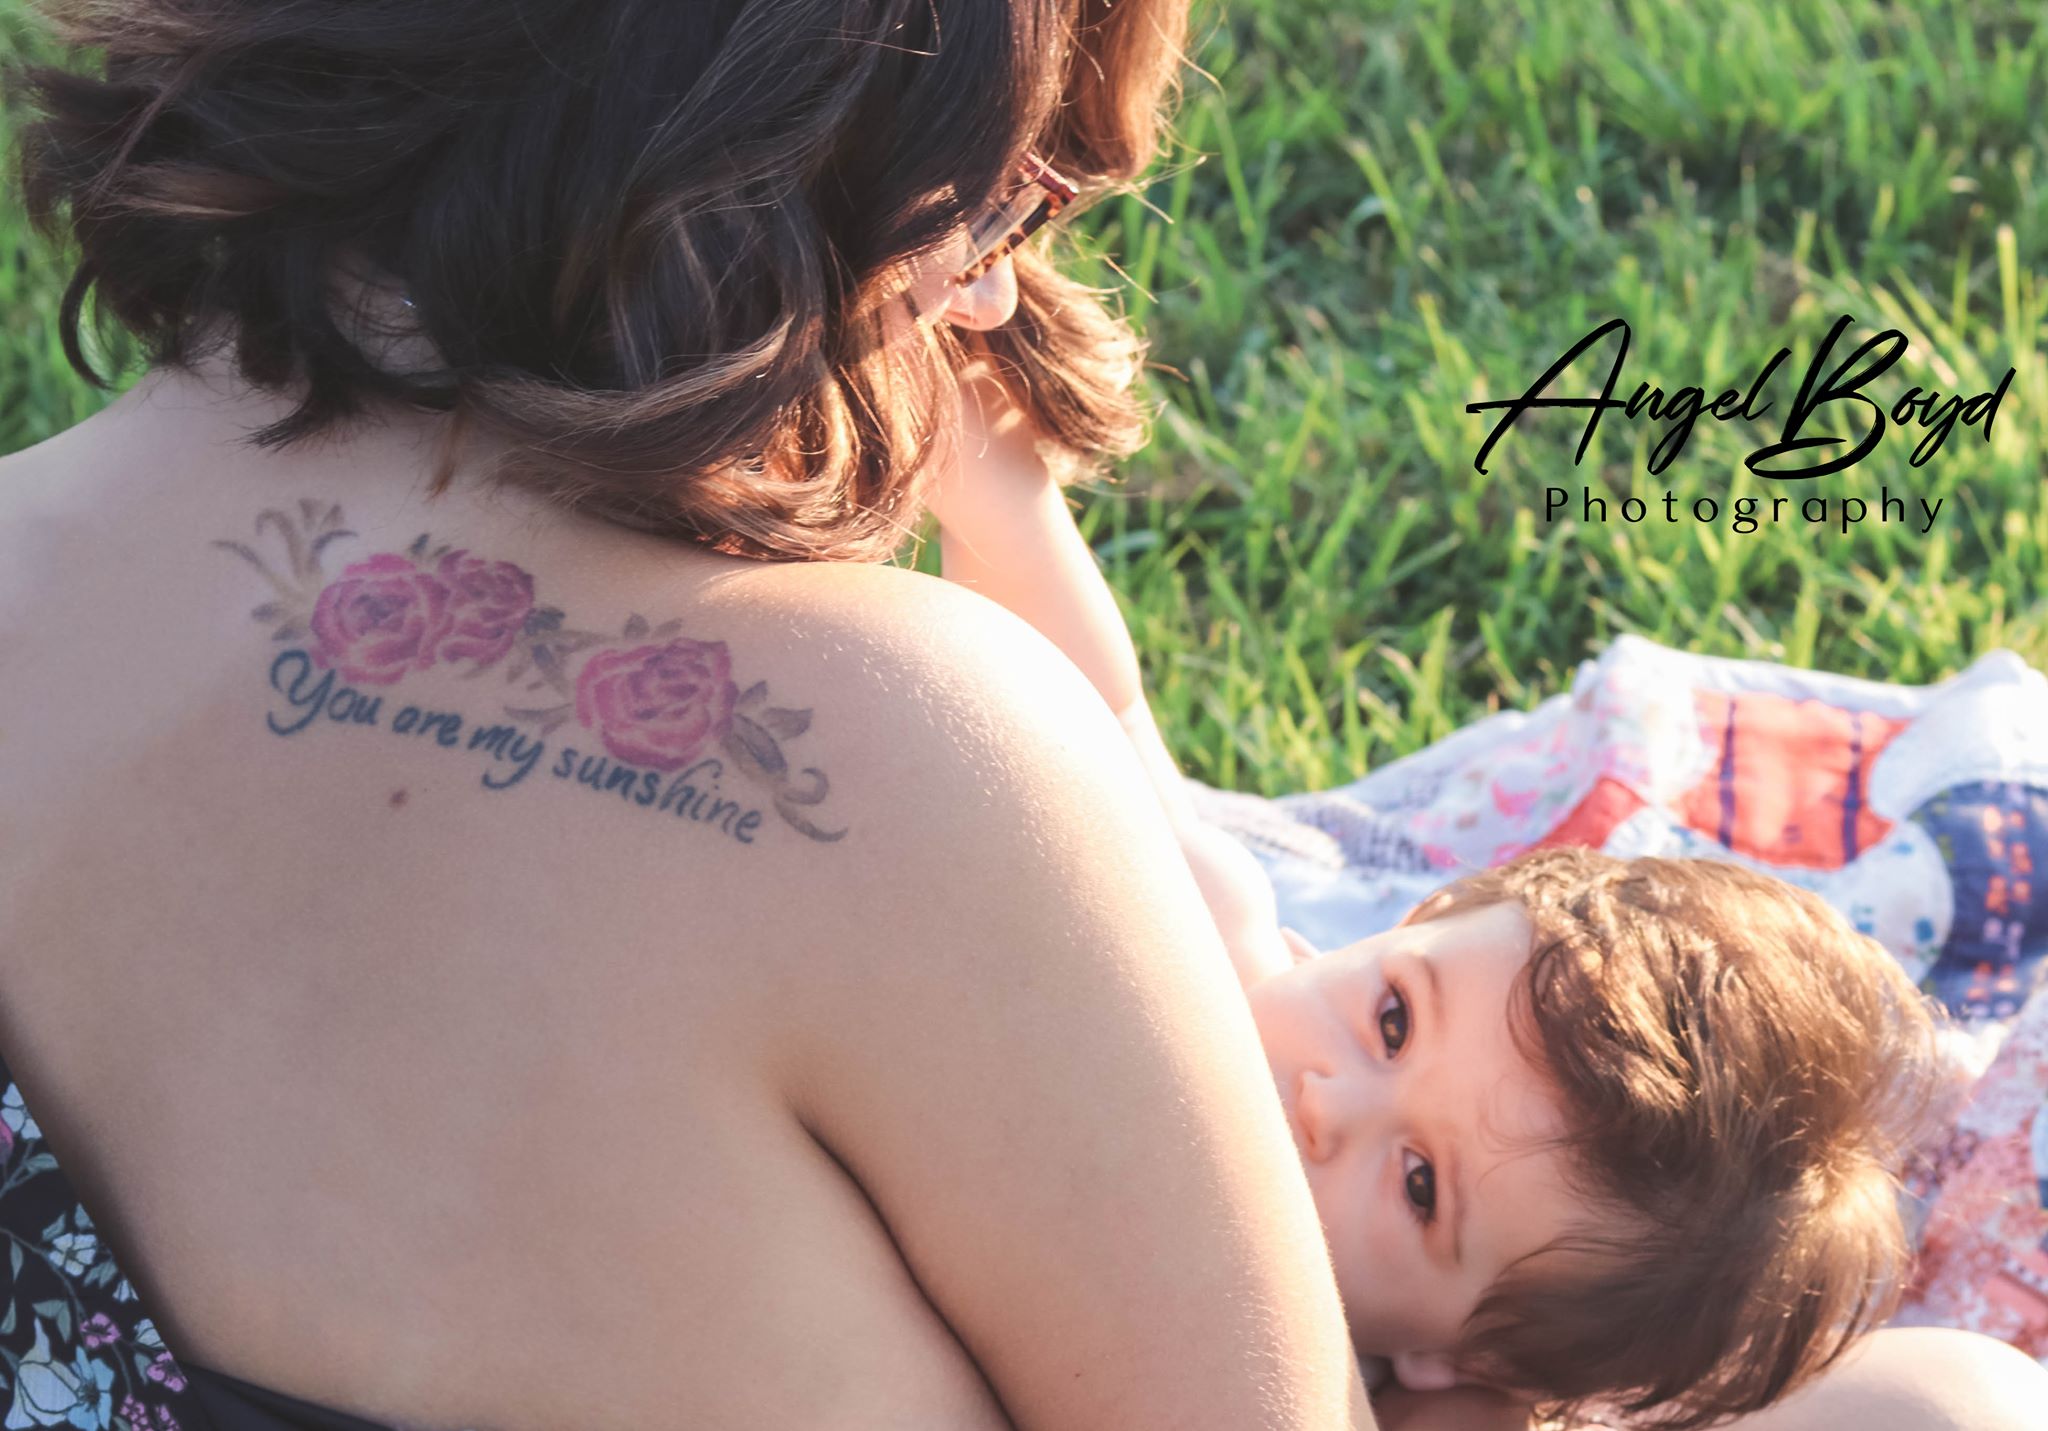 The rise of breastfeeding tattoos to promote nursing  Daily Mail Online